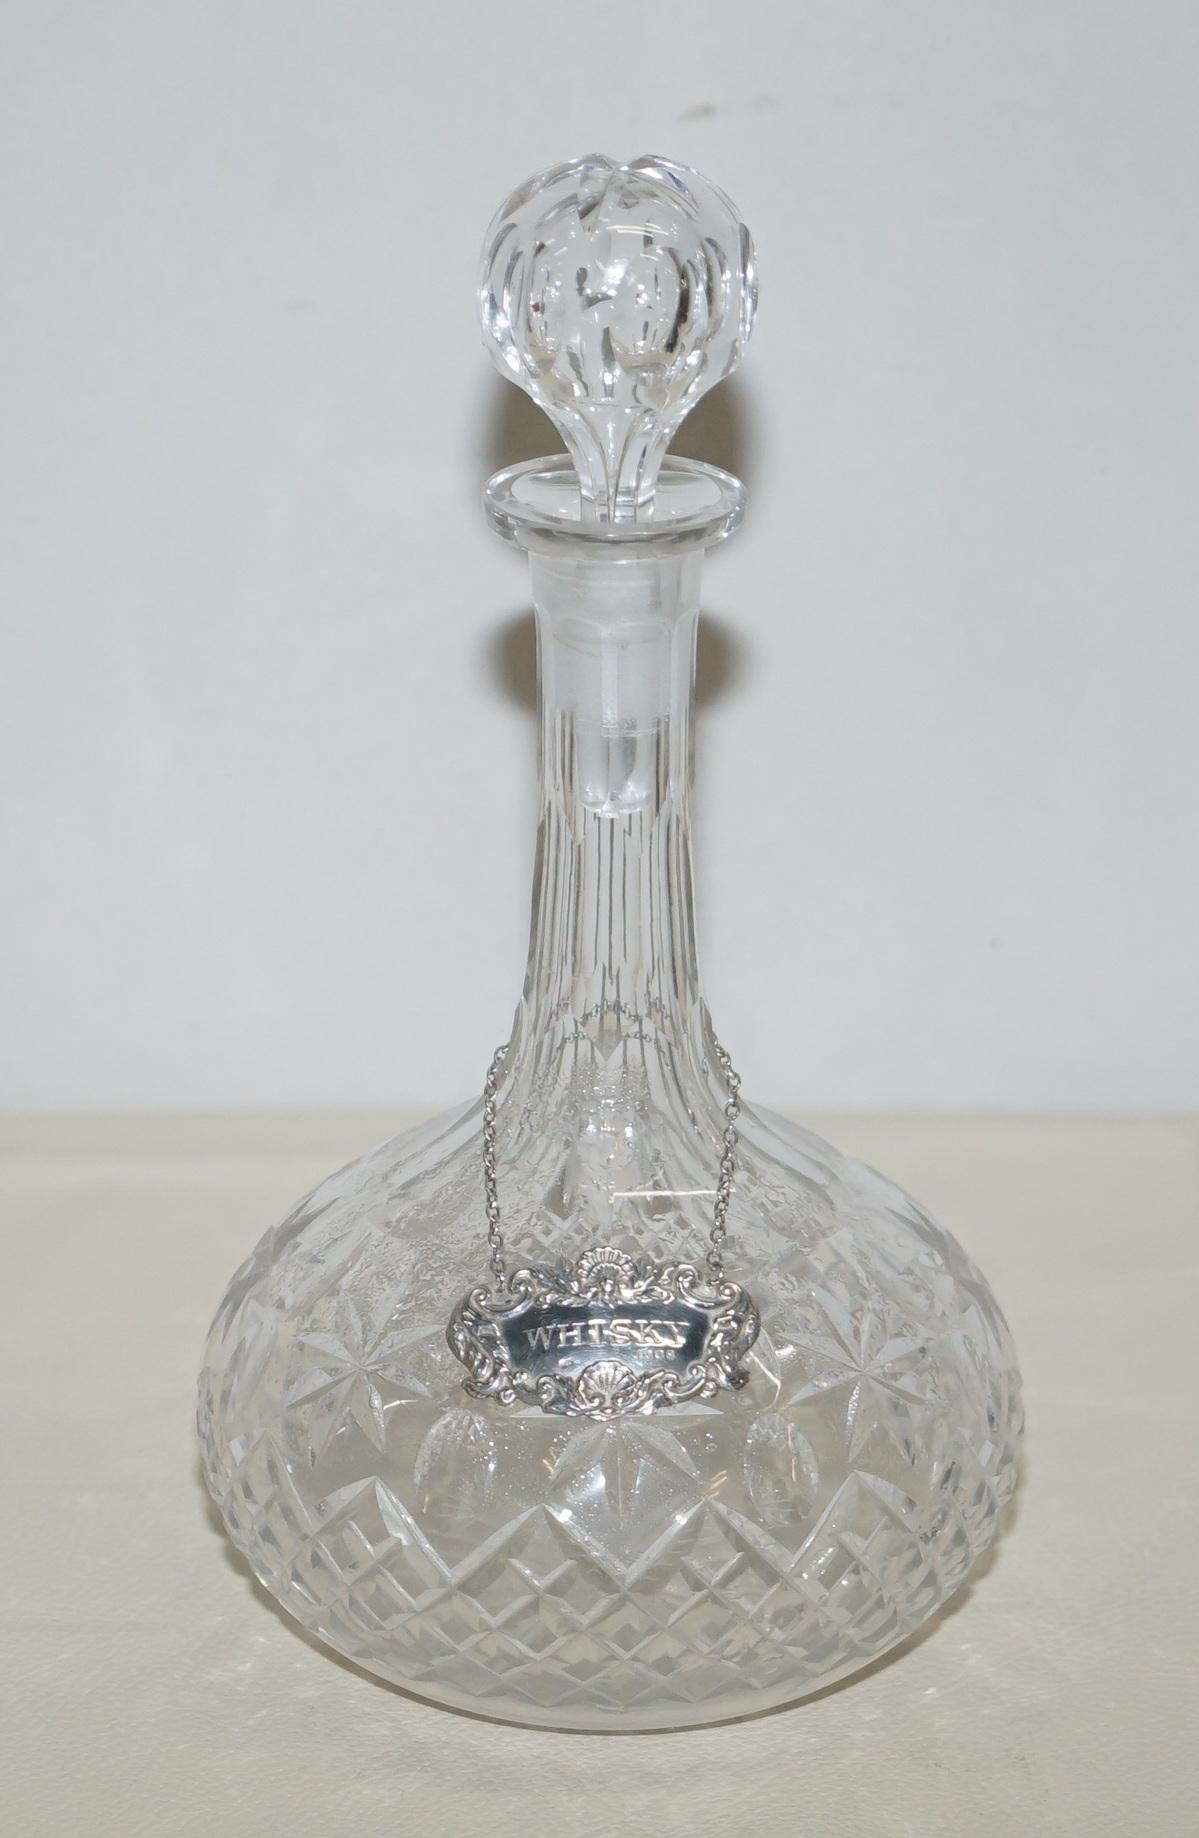 We are delighted to this sublime cut glass crystal decanter with sterling silver Whisky hanging label

A good looking and decorative piece, the hanging collar is clearly hallmarked with the sideways facing lion for 925 sterling silver, the